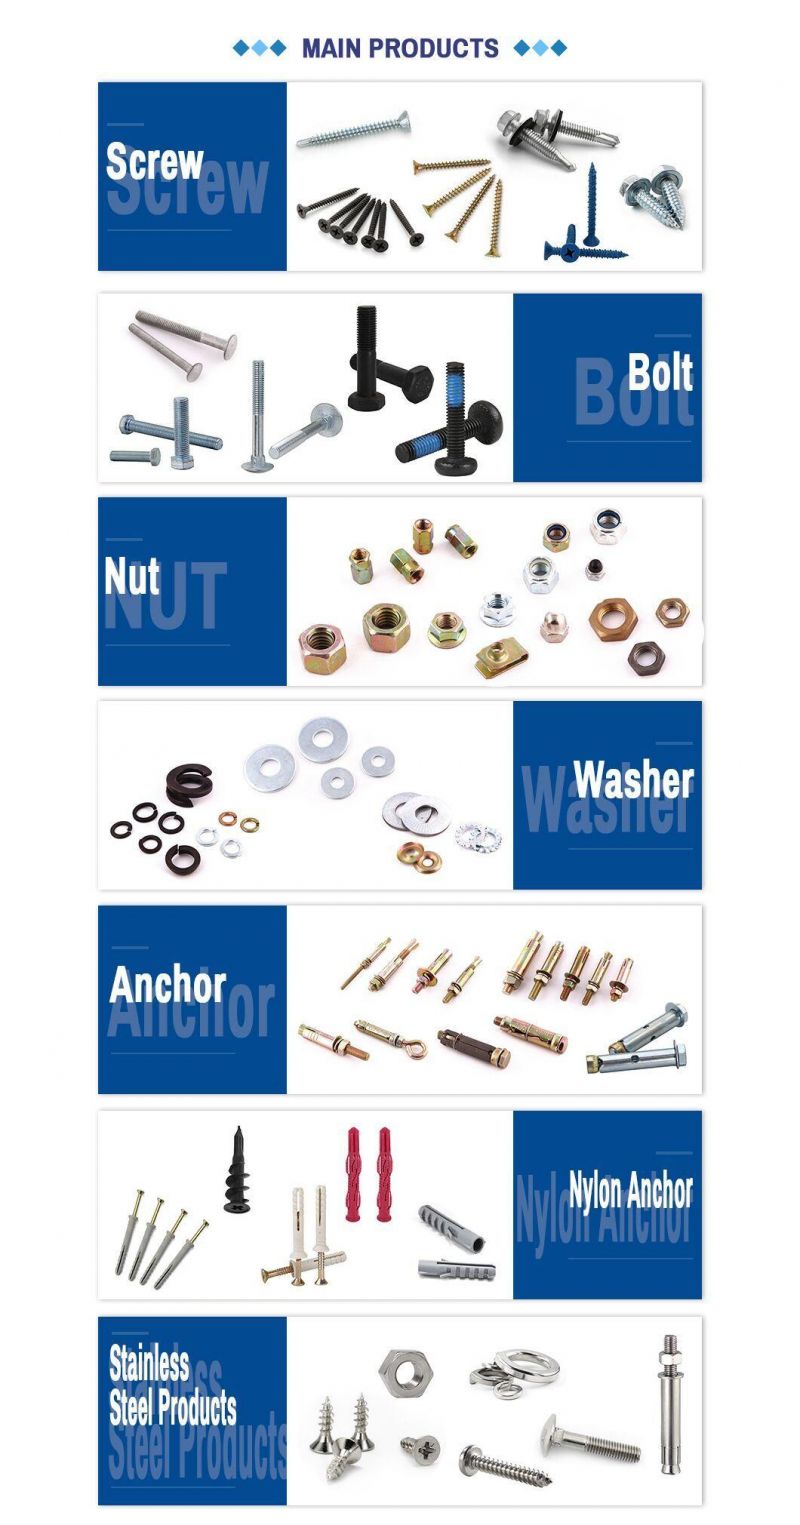 Hexagon Head Common Bolt Weifeng Box+Carton+Pallet Stainless Pipe Carbon Steel